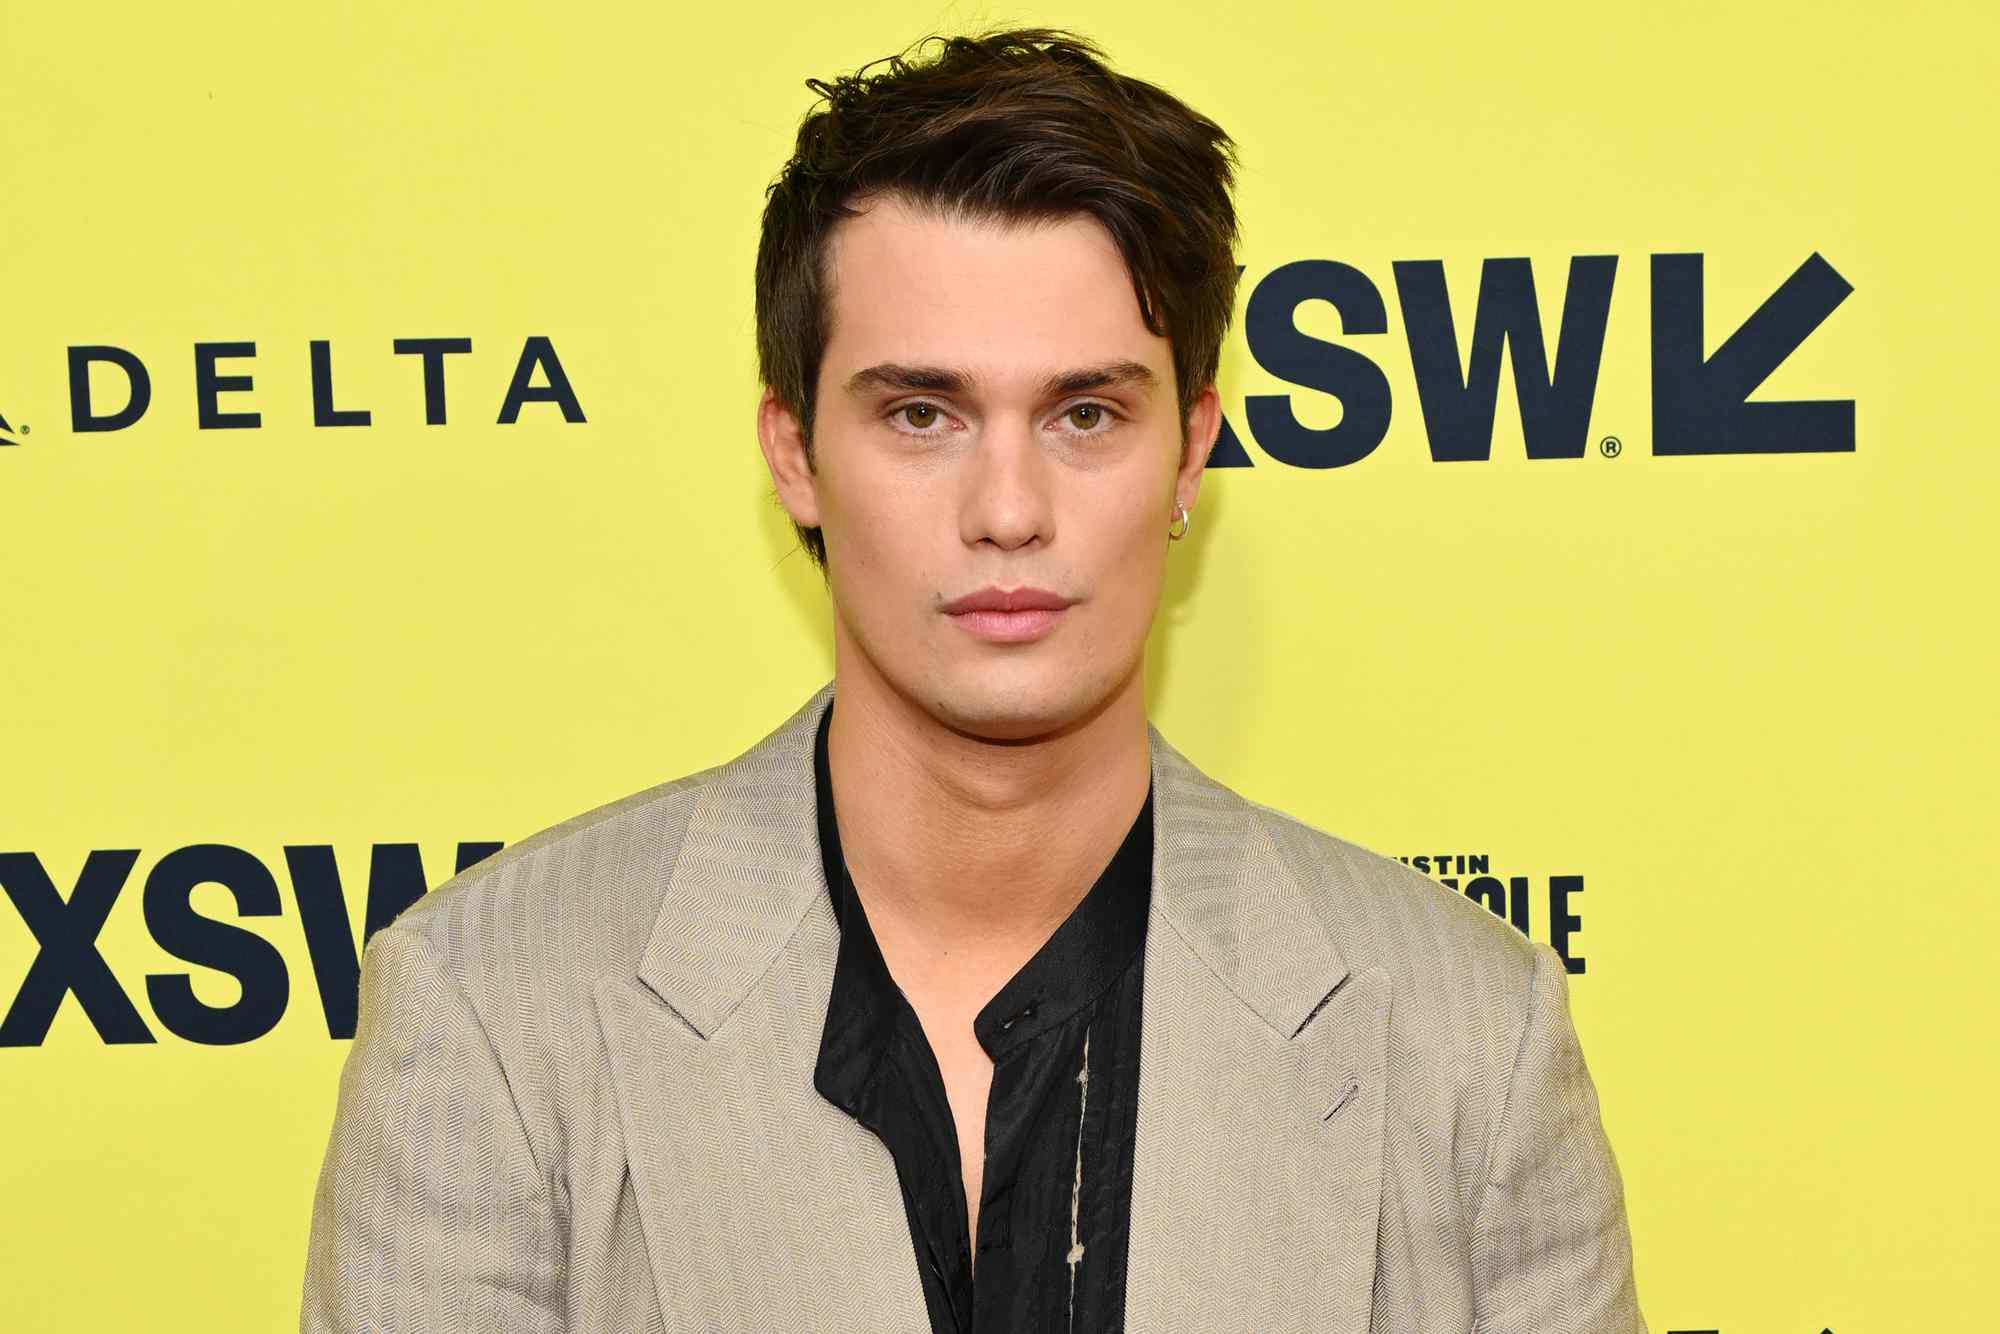 Nicholas Galitzine Says Attention on His Looks Makes Him Feel Like a 'Cut of Beef at a Meat Market'